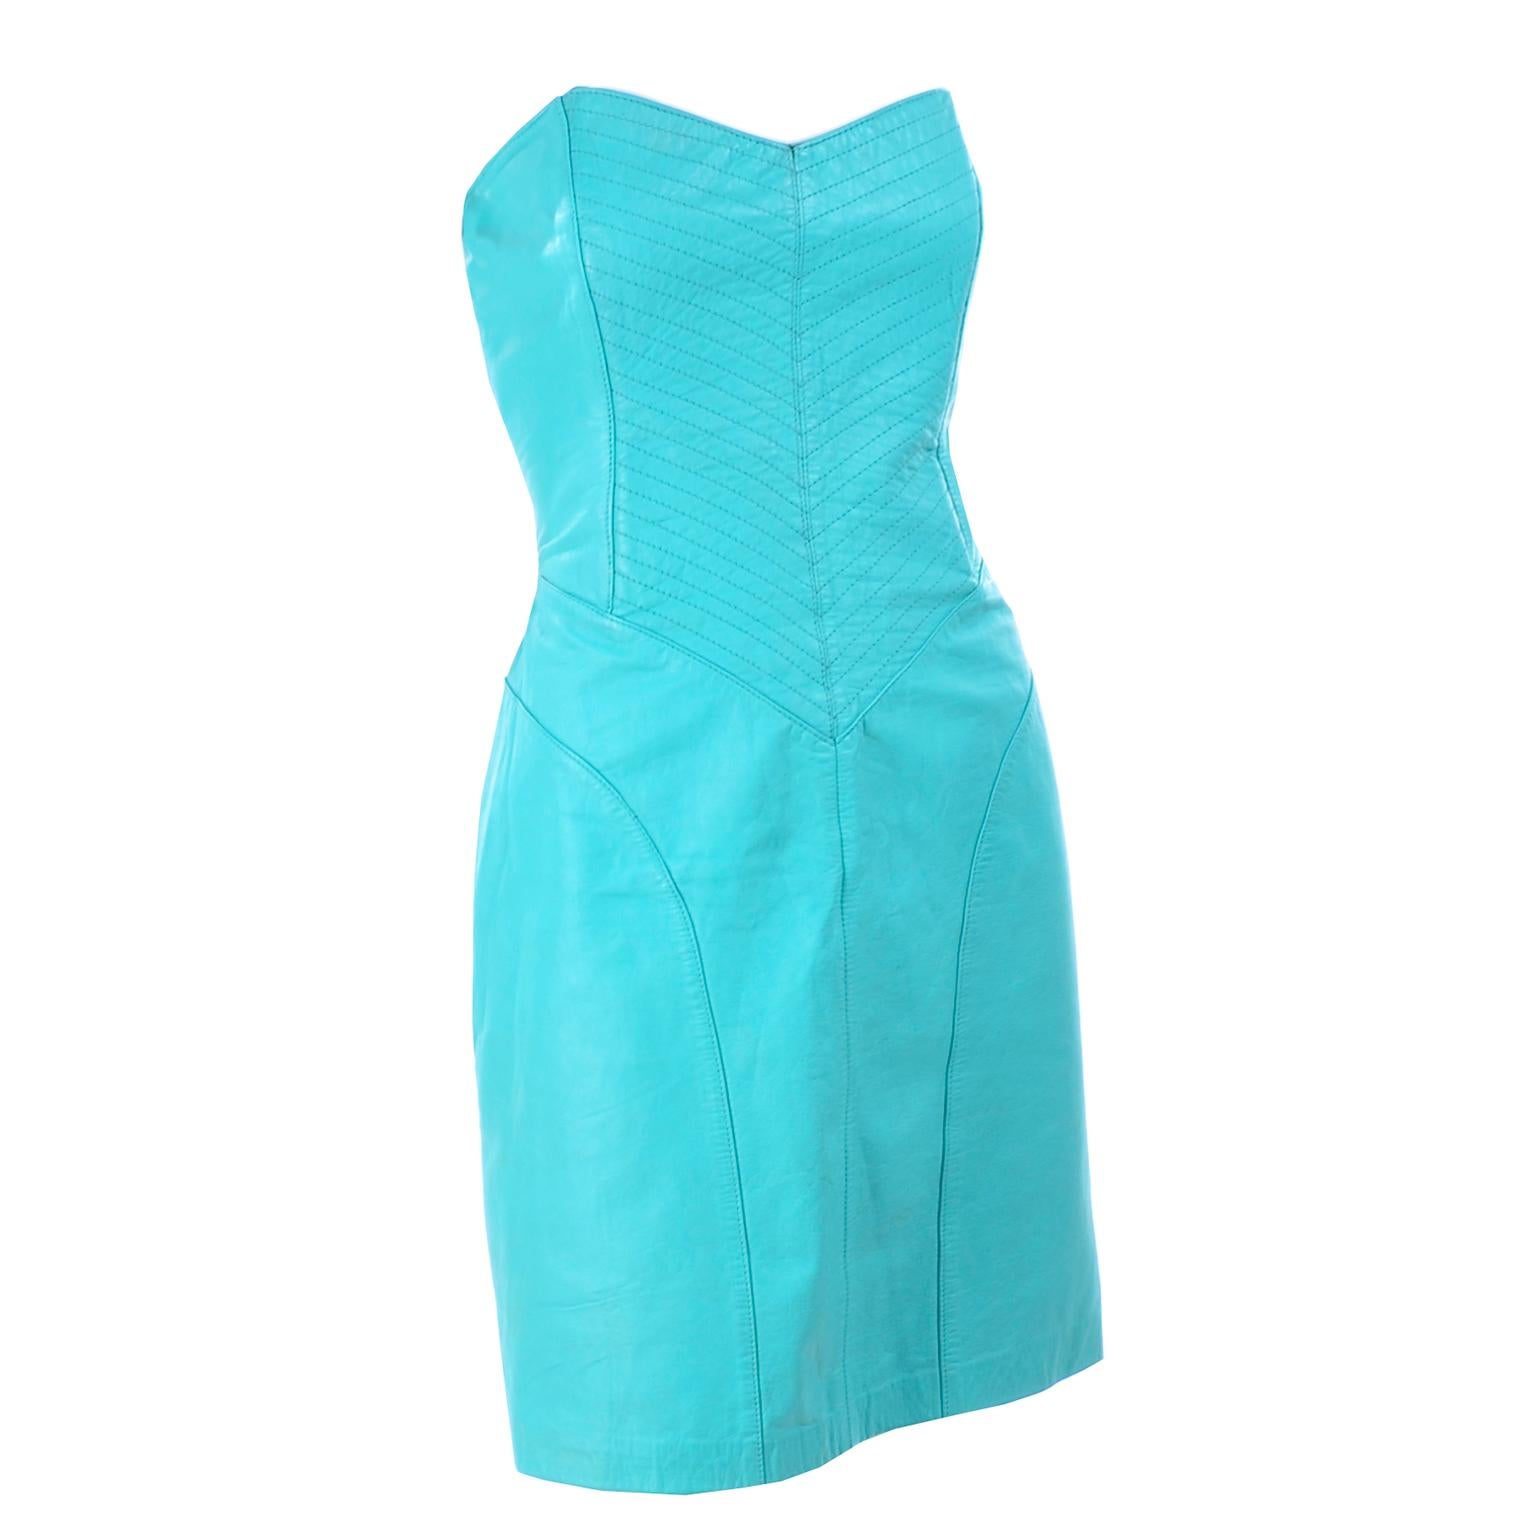 Vintage Strapless Turquoise Blue Green Leather 1980s Dress in Size 4/6